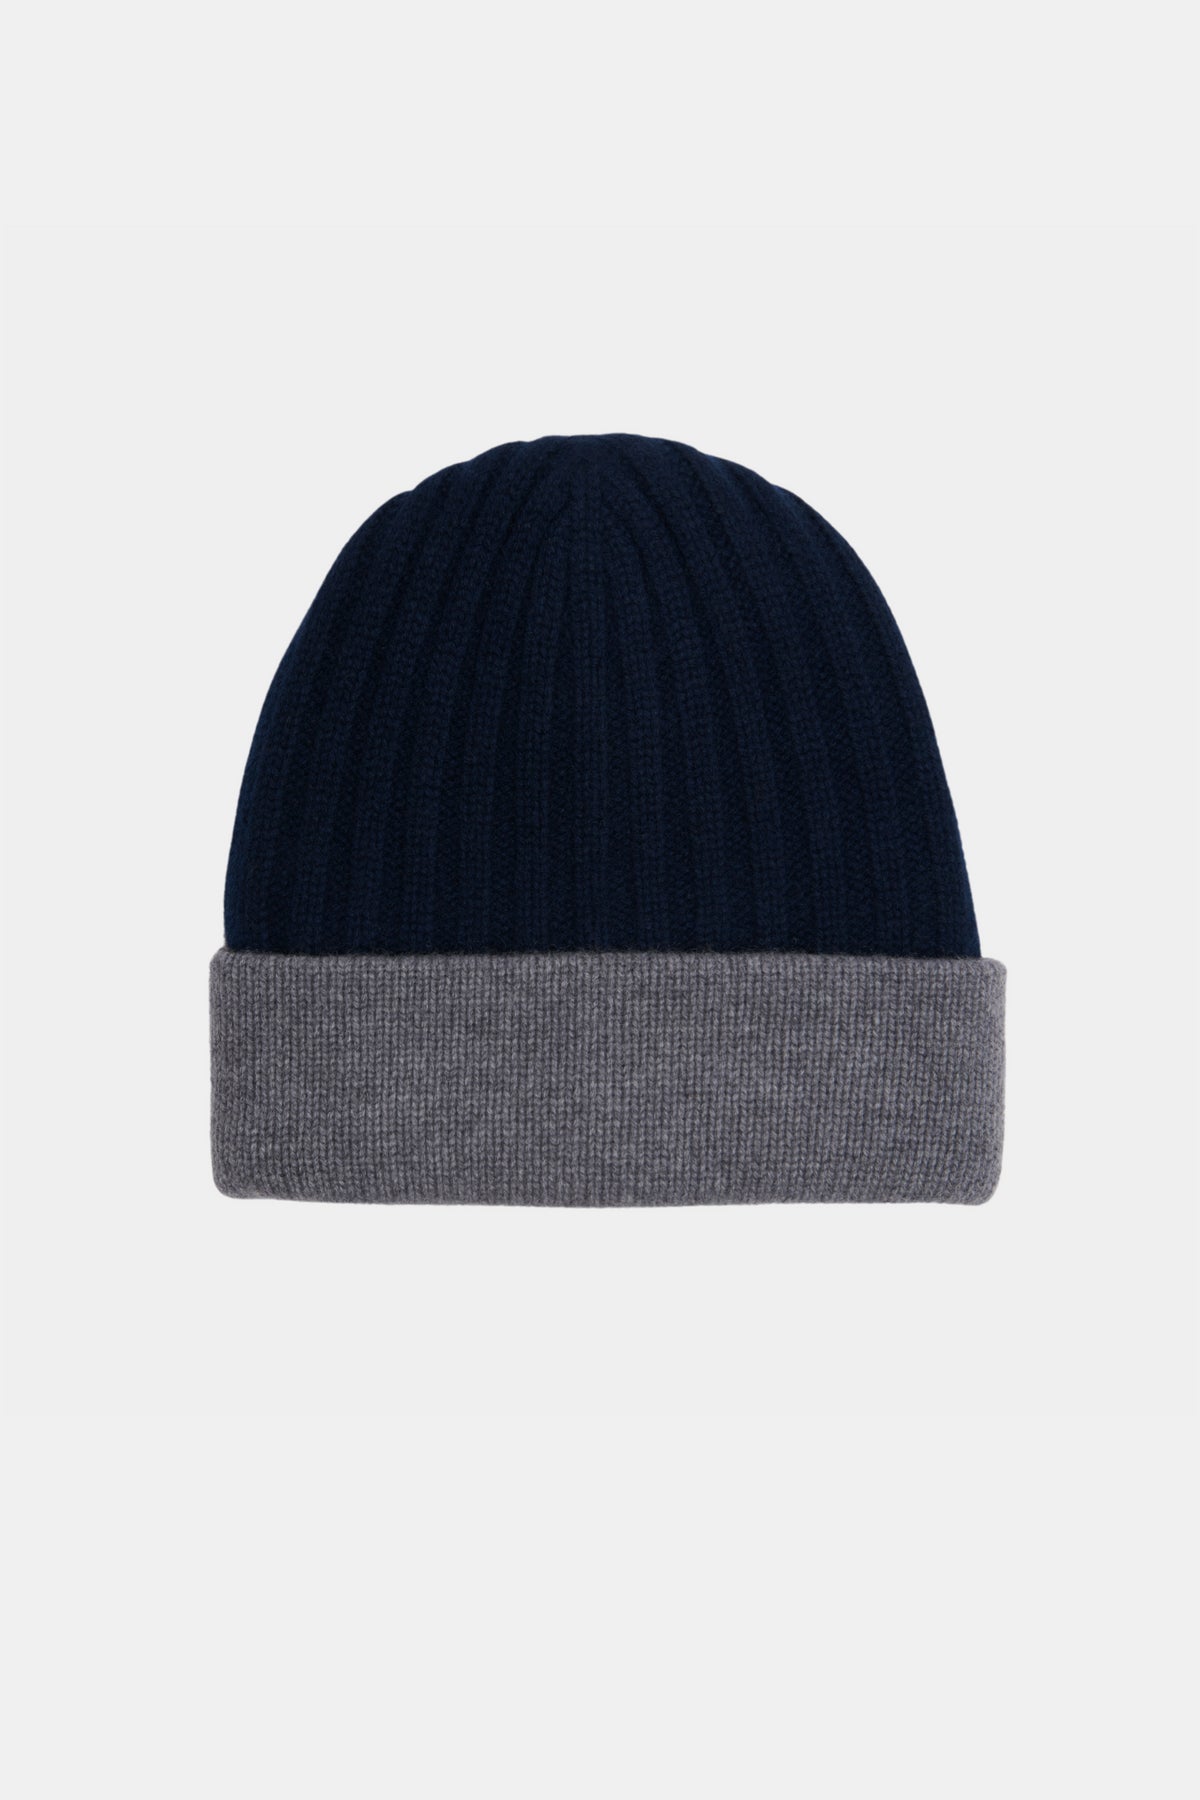 Pure Cashmere Beanies Cozy Warm for Winter